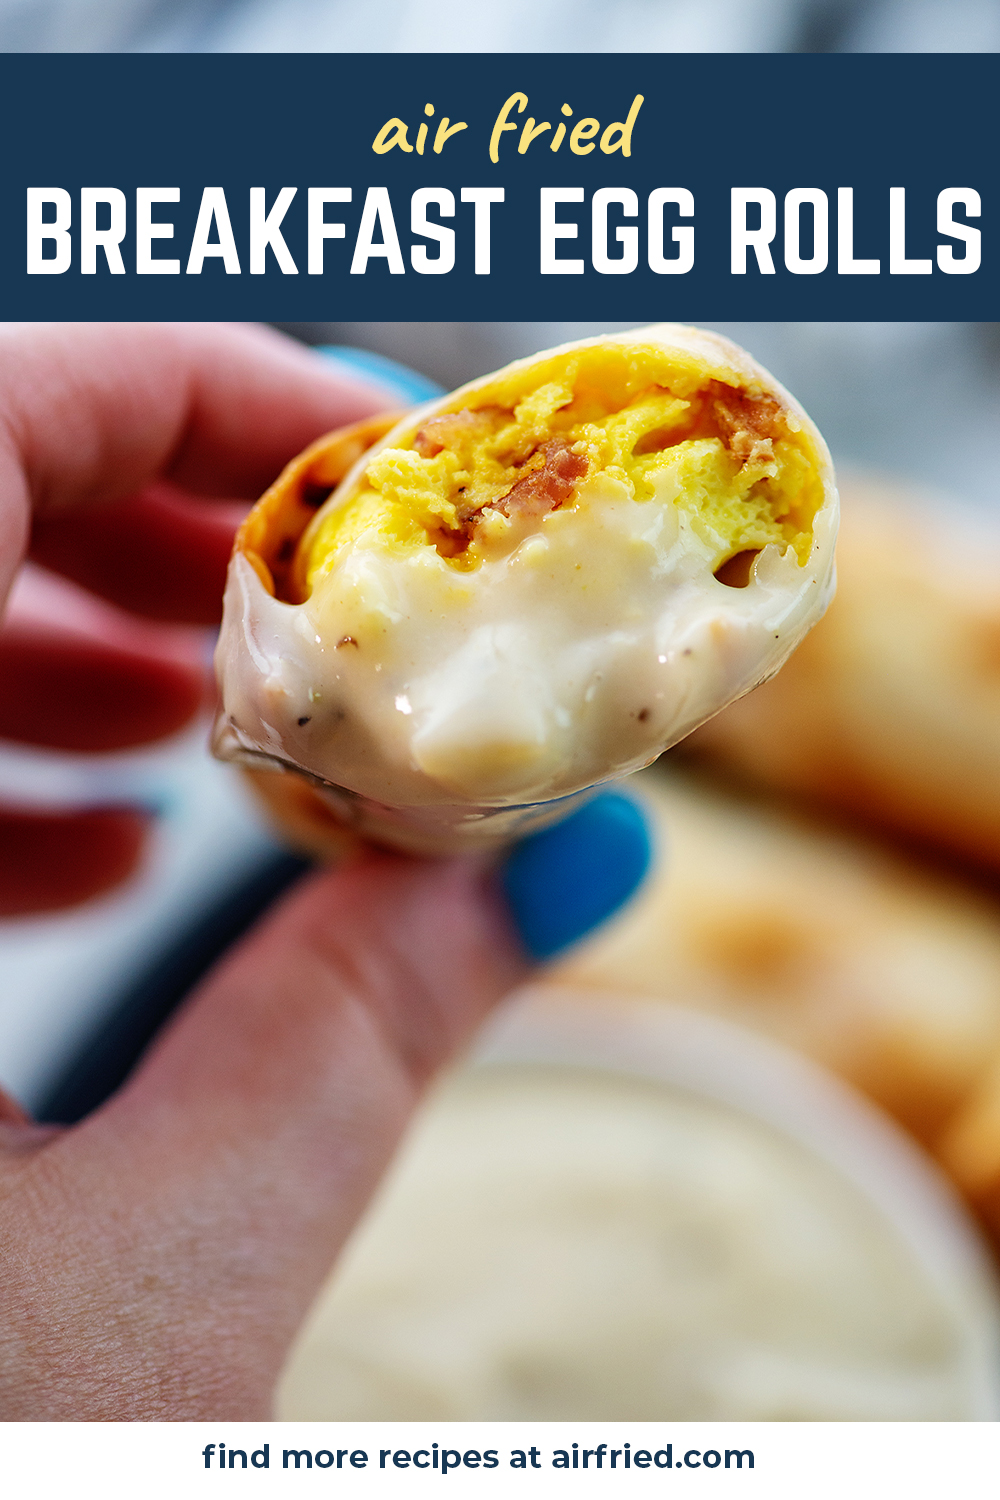 These breakfast egg rolls are cooked in the air fryer for a crisp finish without a bunch of grease.  Try them out today!